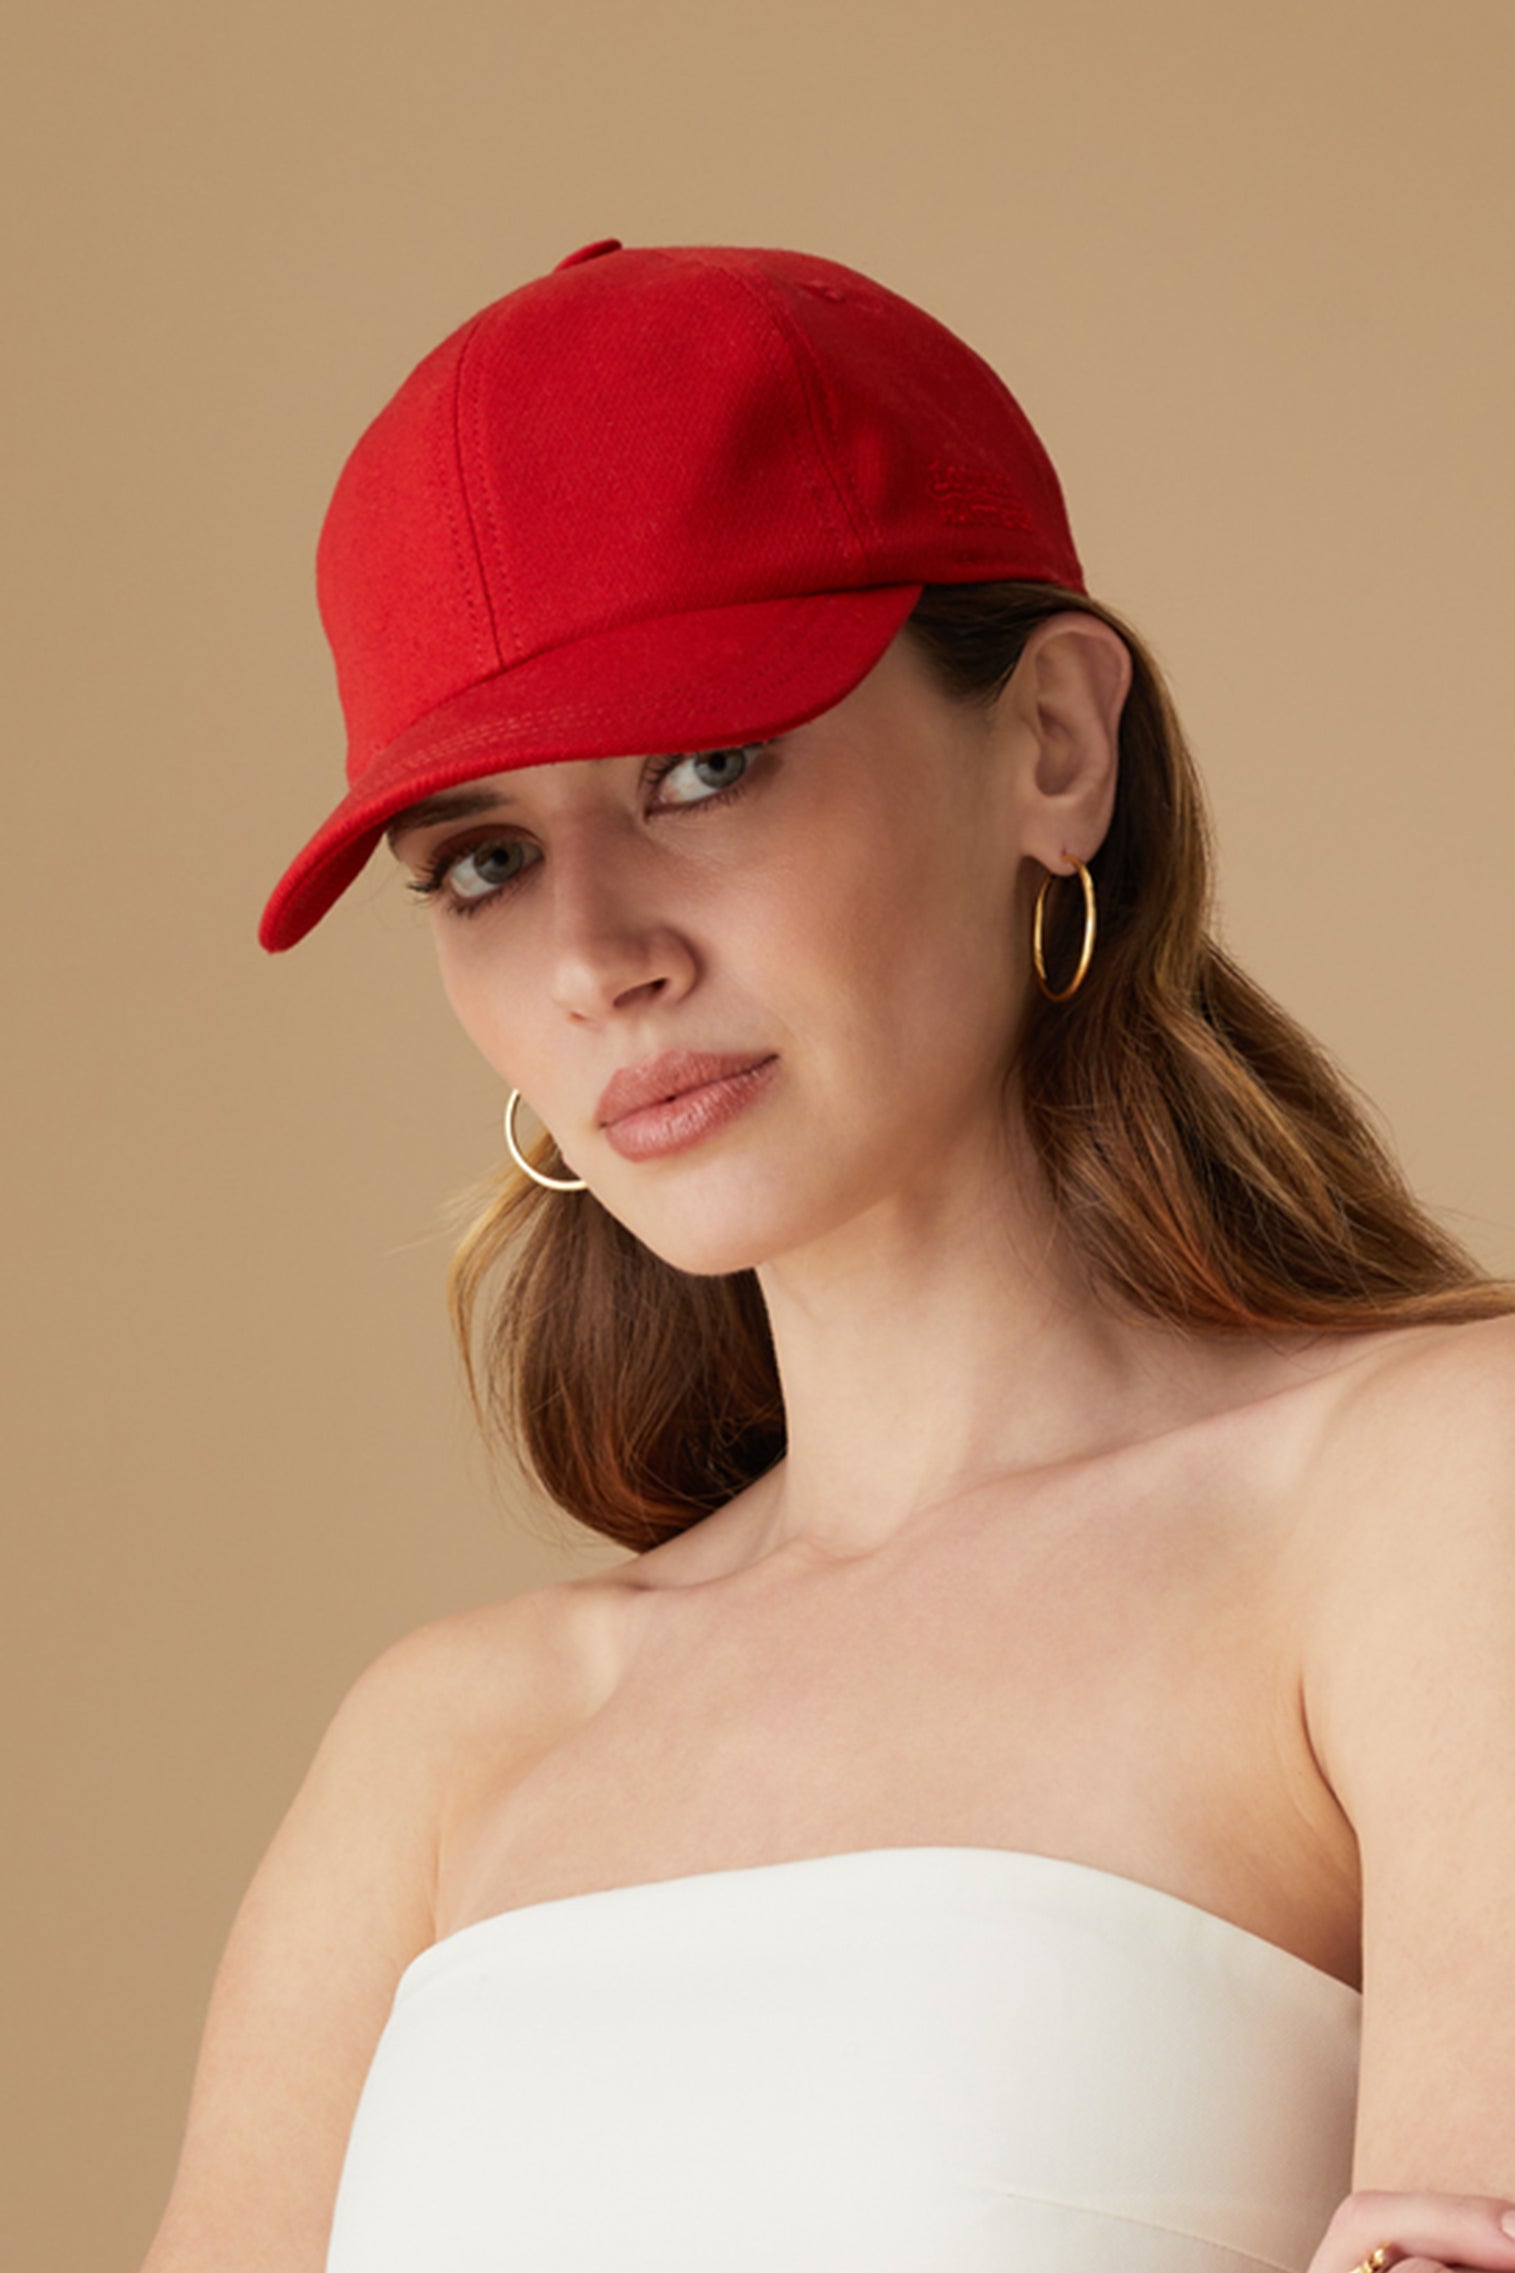 Adjustable Red Baseball Cap - Womens Featured - Lock & Co. Hatters London UK